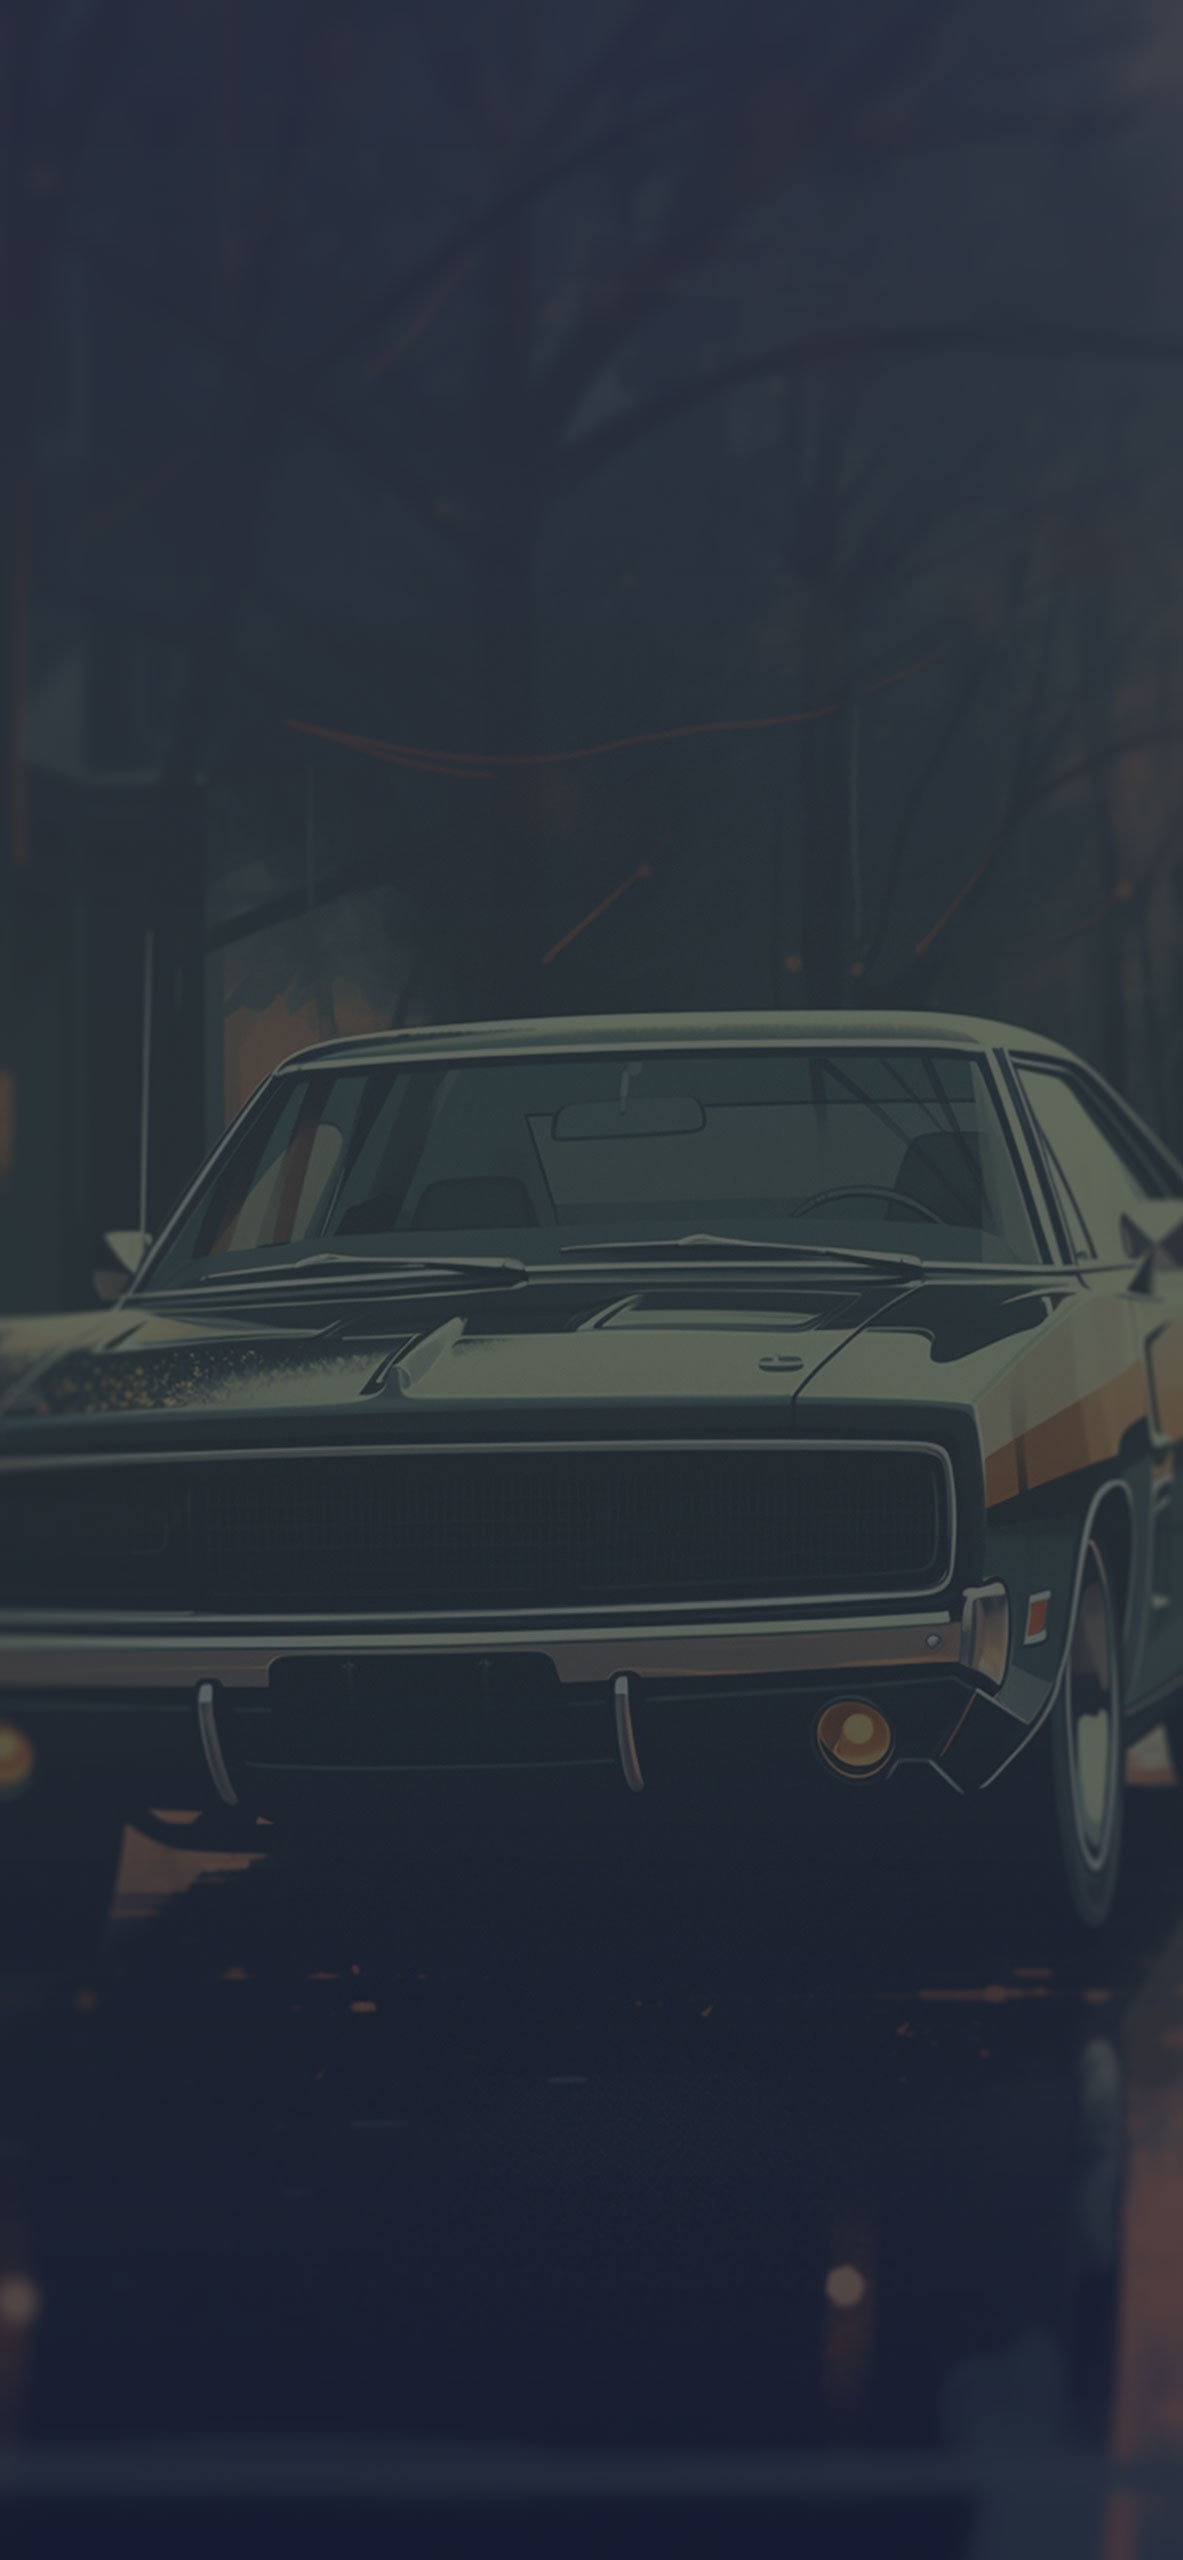 Dodge Charger Speed Minimal IPhone Wallpaper Iphoneswallpaperscom  IPhone  Wallpapers